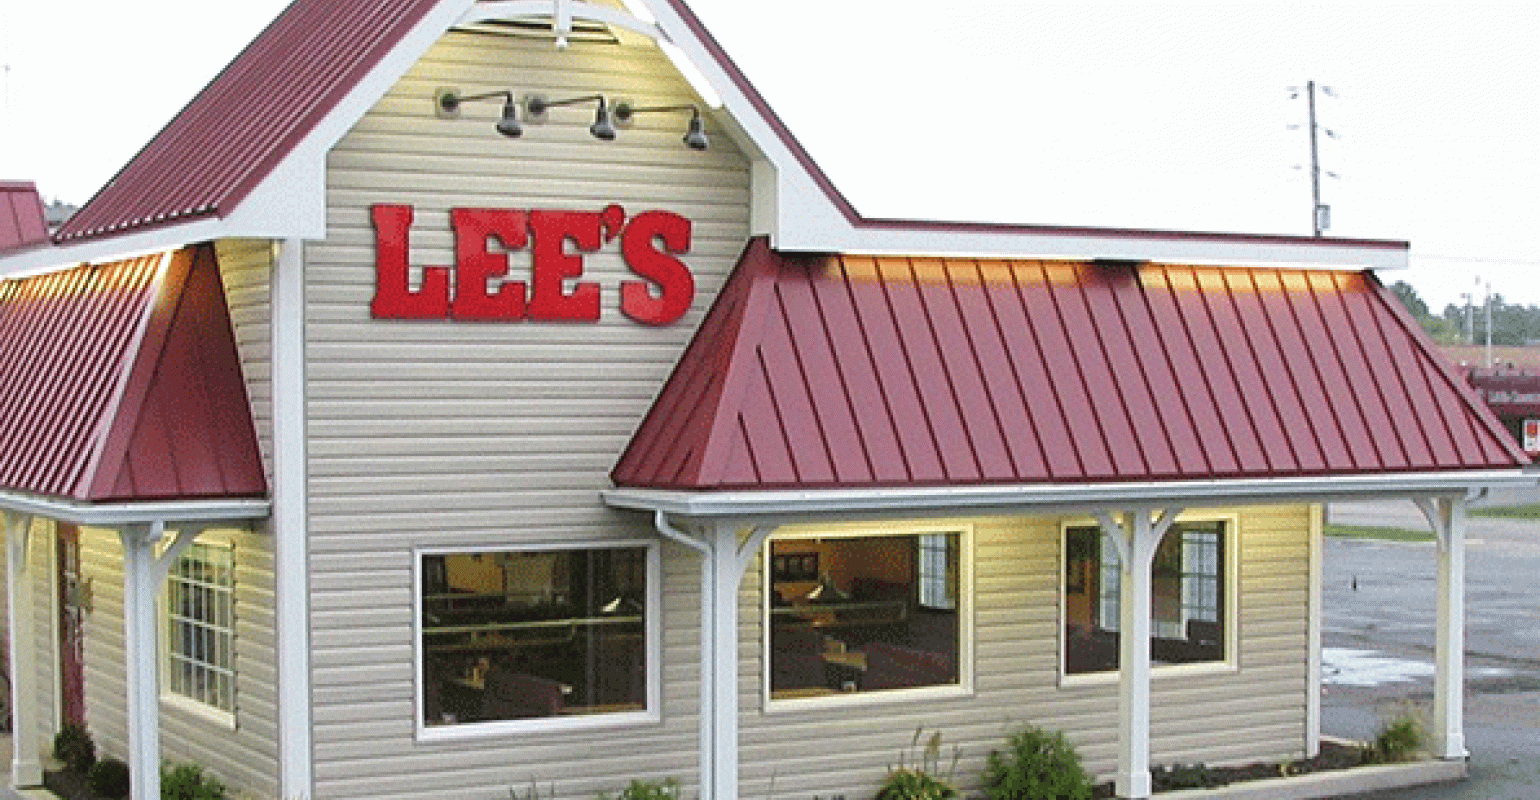 The Next 20: Lee's Famous Recipe Chicken | Nation's Restaurant News